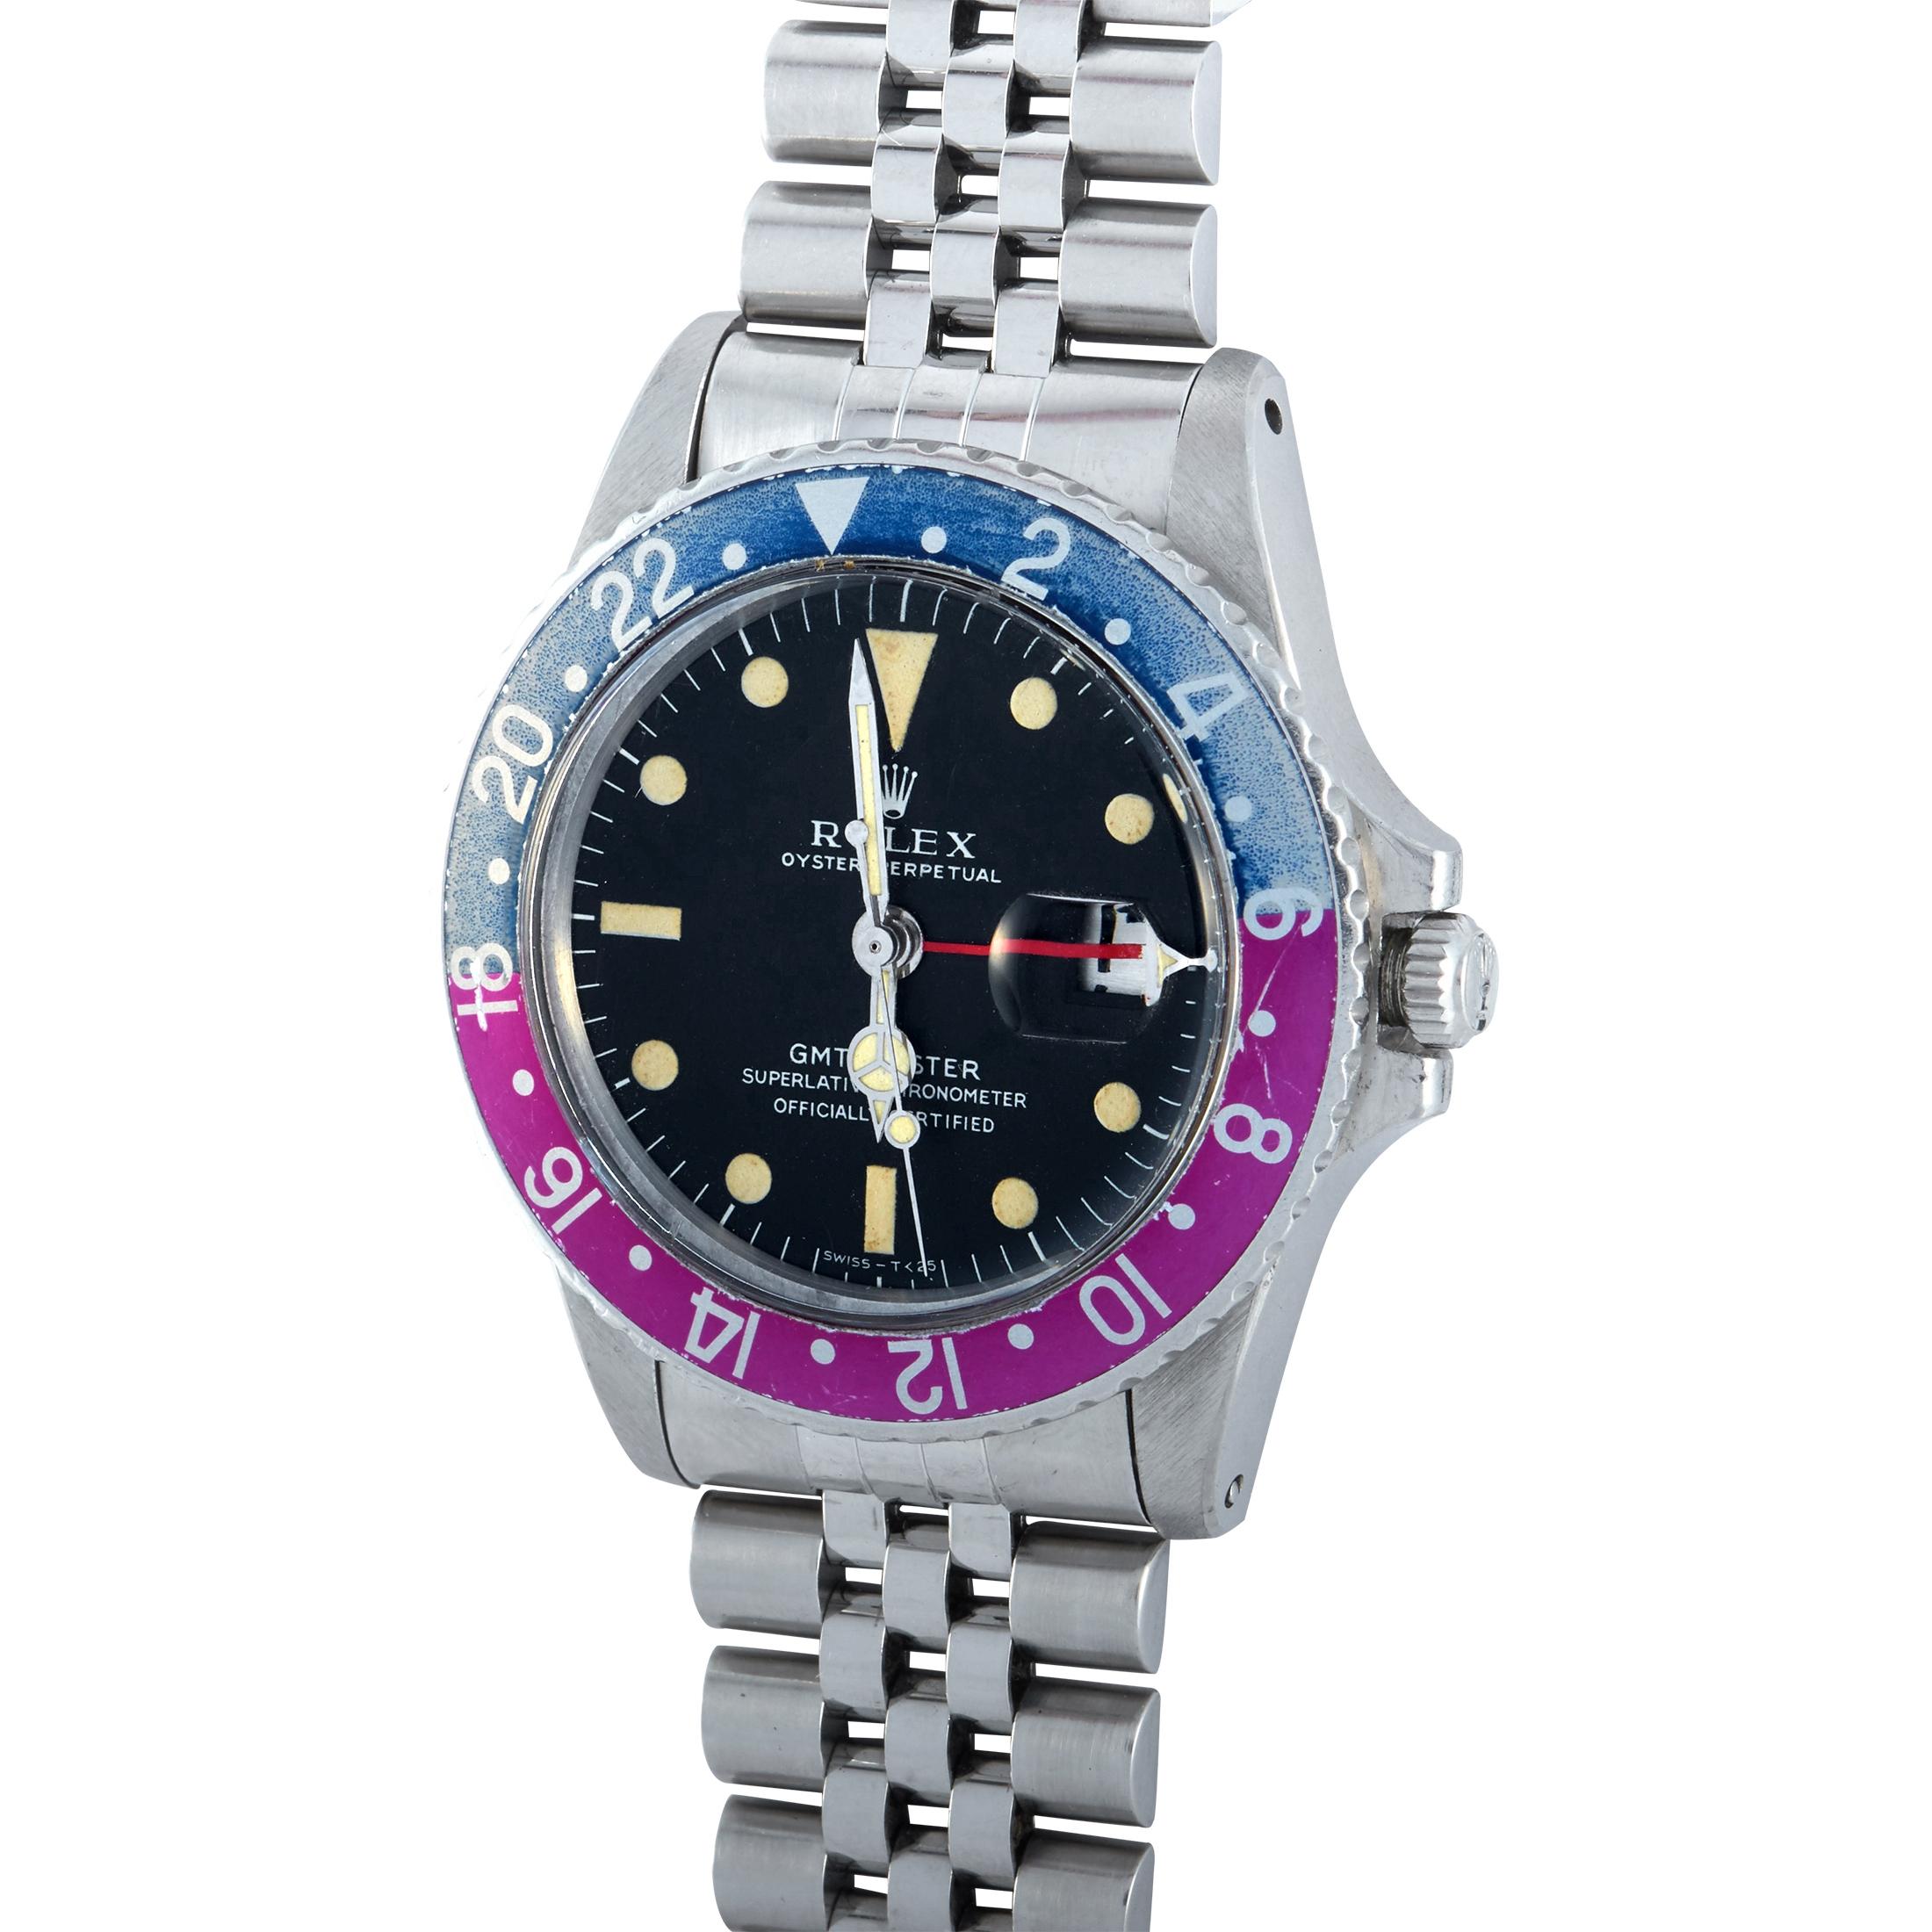 Rolex GMT-Master, Reference 1675, circa 1967, with first execution (MK1) 